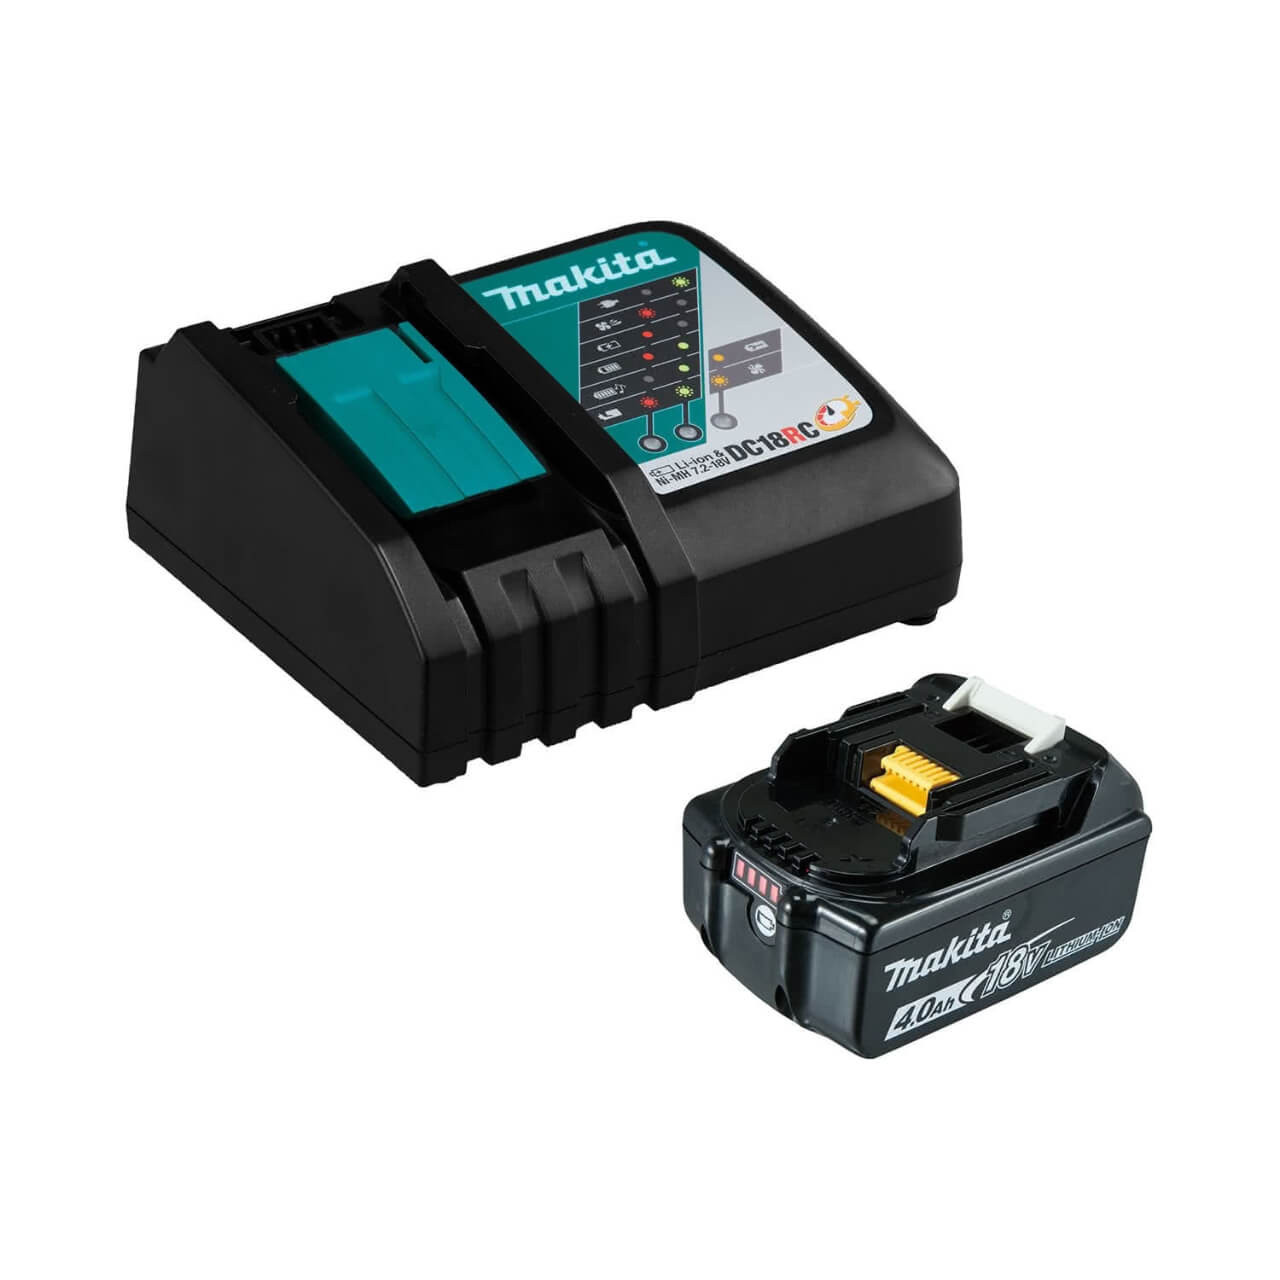 Makita 18V Single Port Rapid Battery Charger with 4.0Ah battery